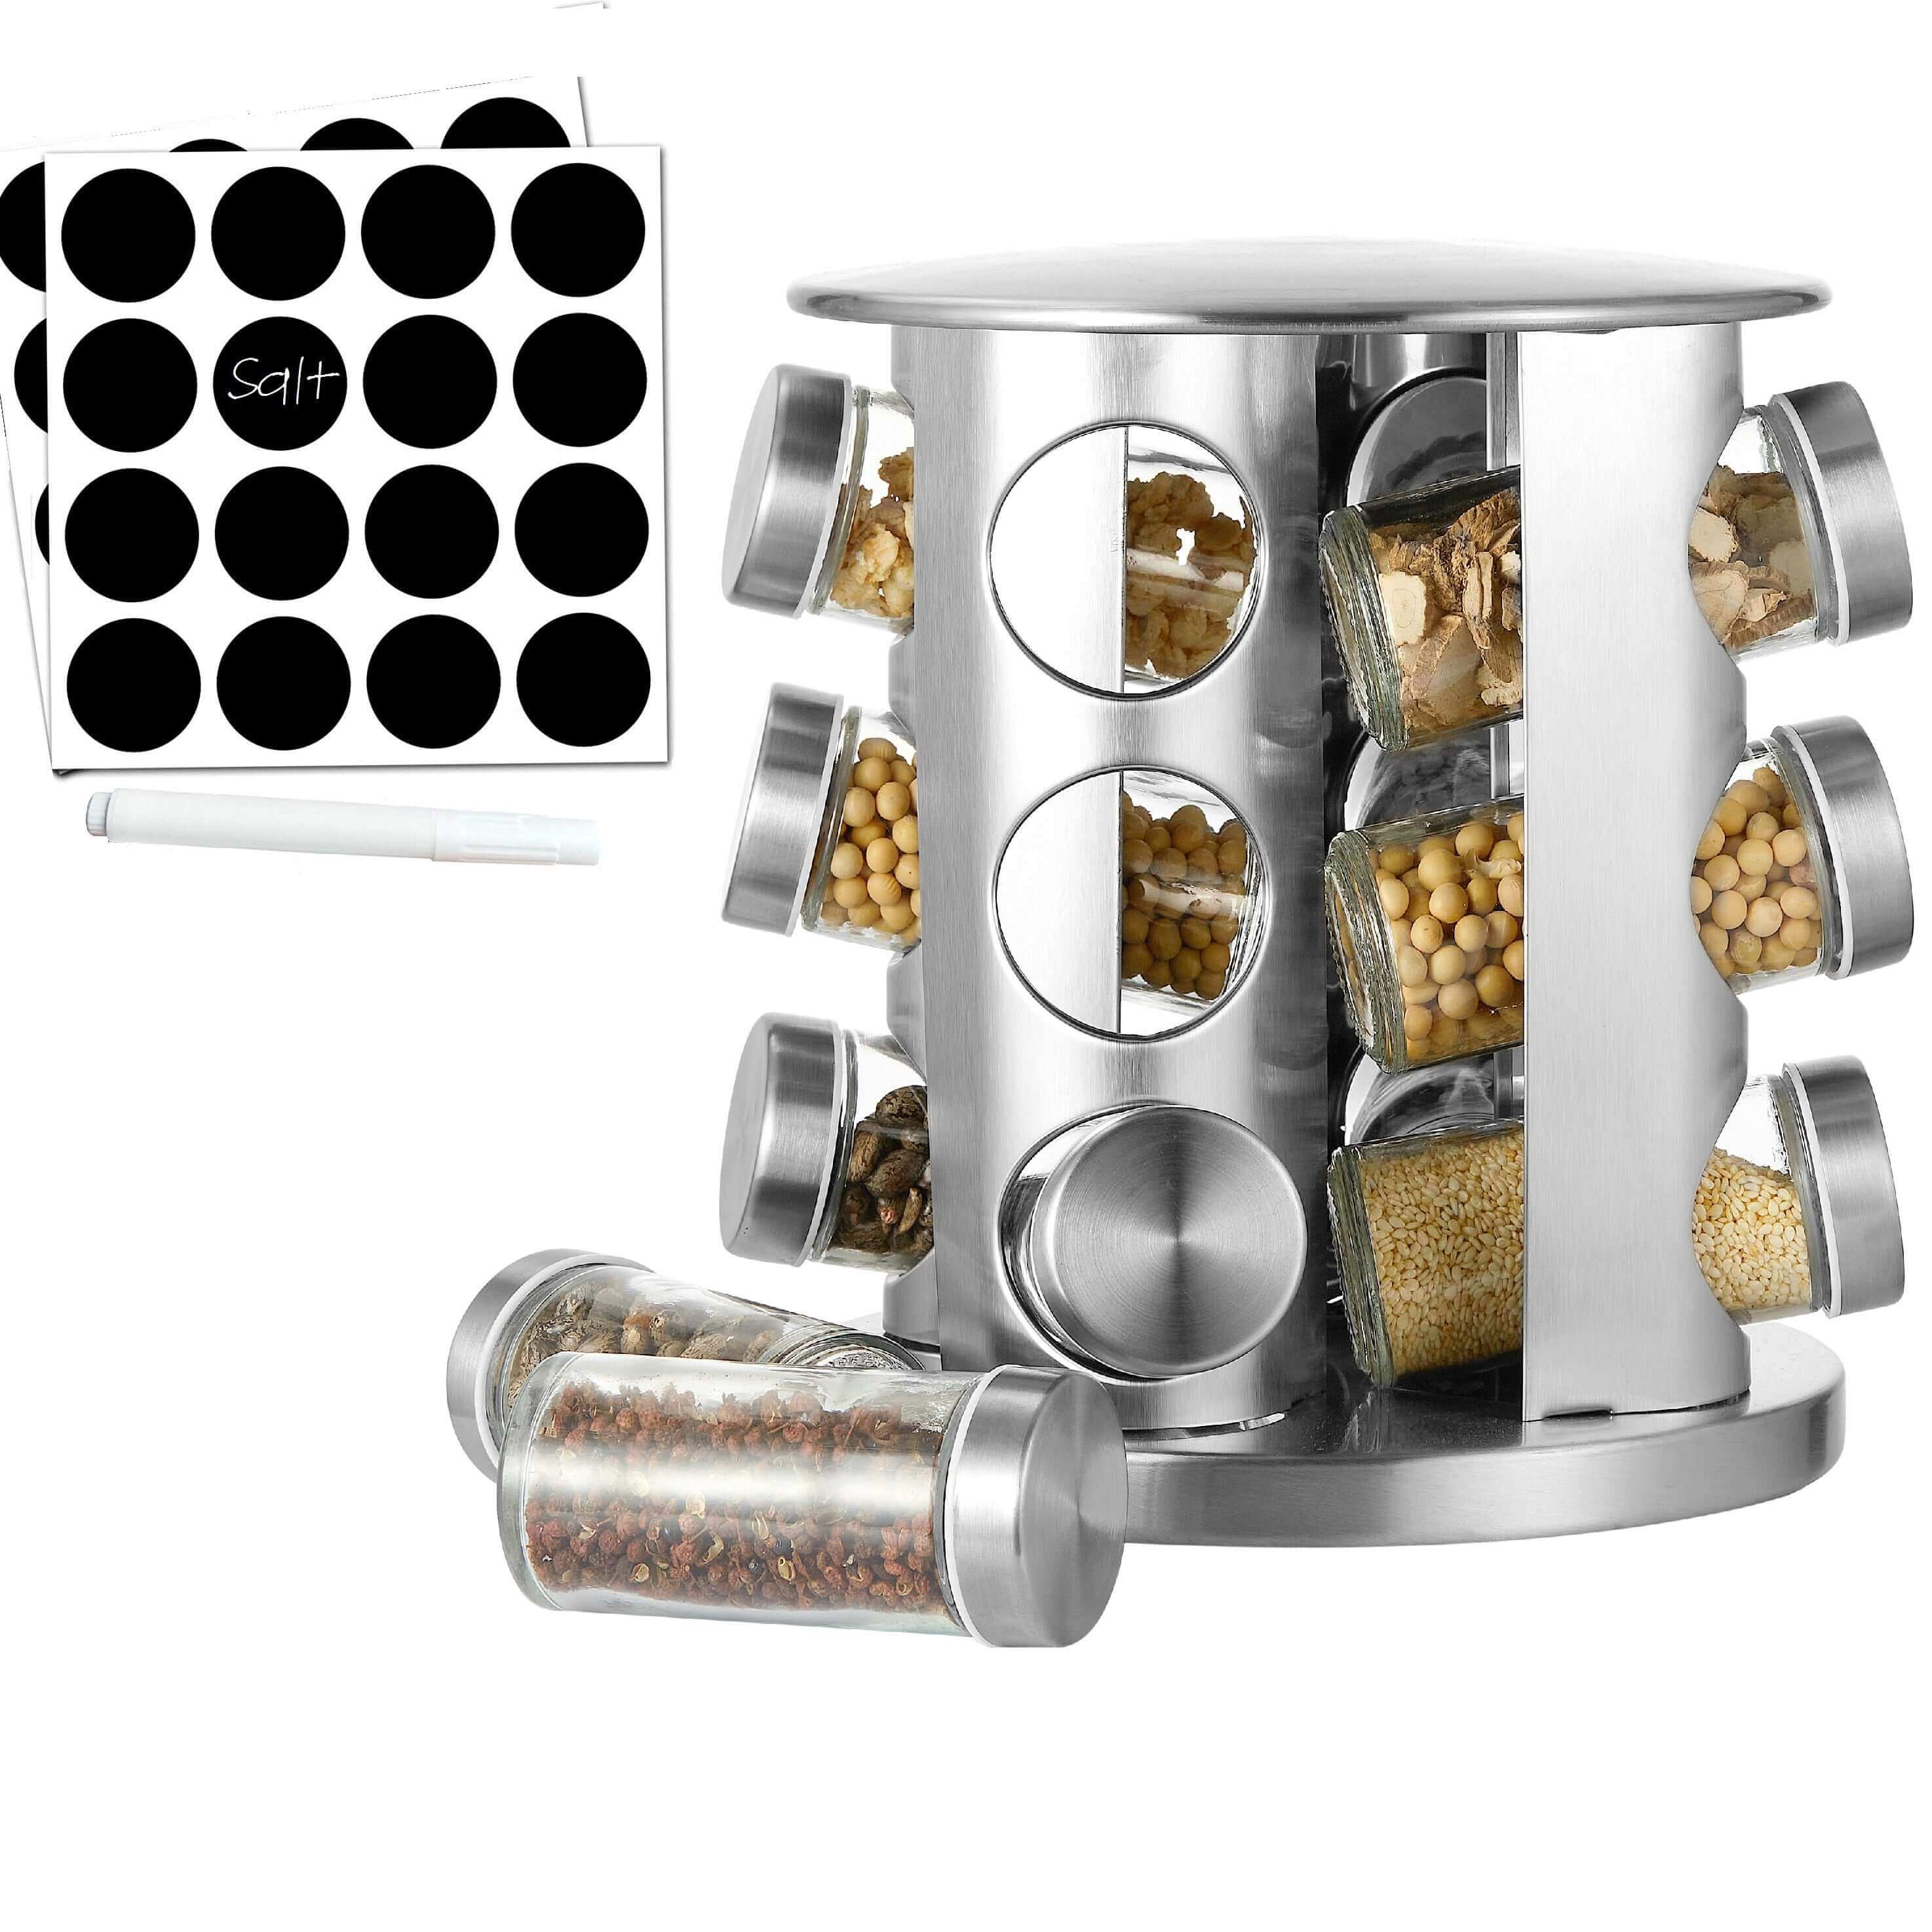 https://cdn.shopify.com/s/files/1/2091/6511/products/cheer-collection-rotating-spice-rack-for-countertop-with-12-jars-stainless-steel-revolving-storage-organizer-for-spices-and-seasonings-plus-dry-erase-marker-and-555678.jpg?v=1672395927